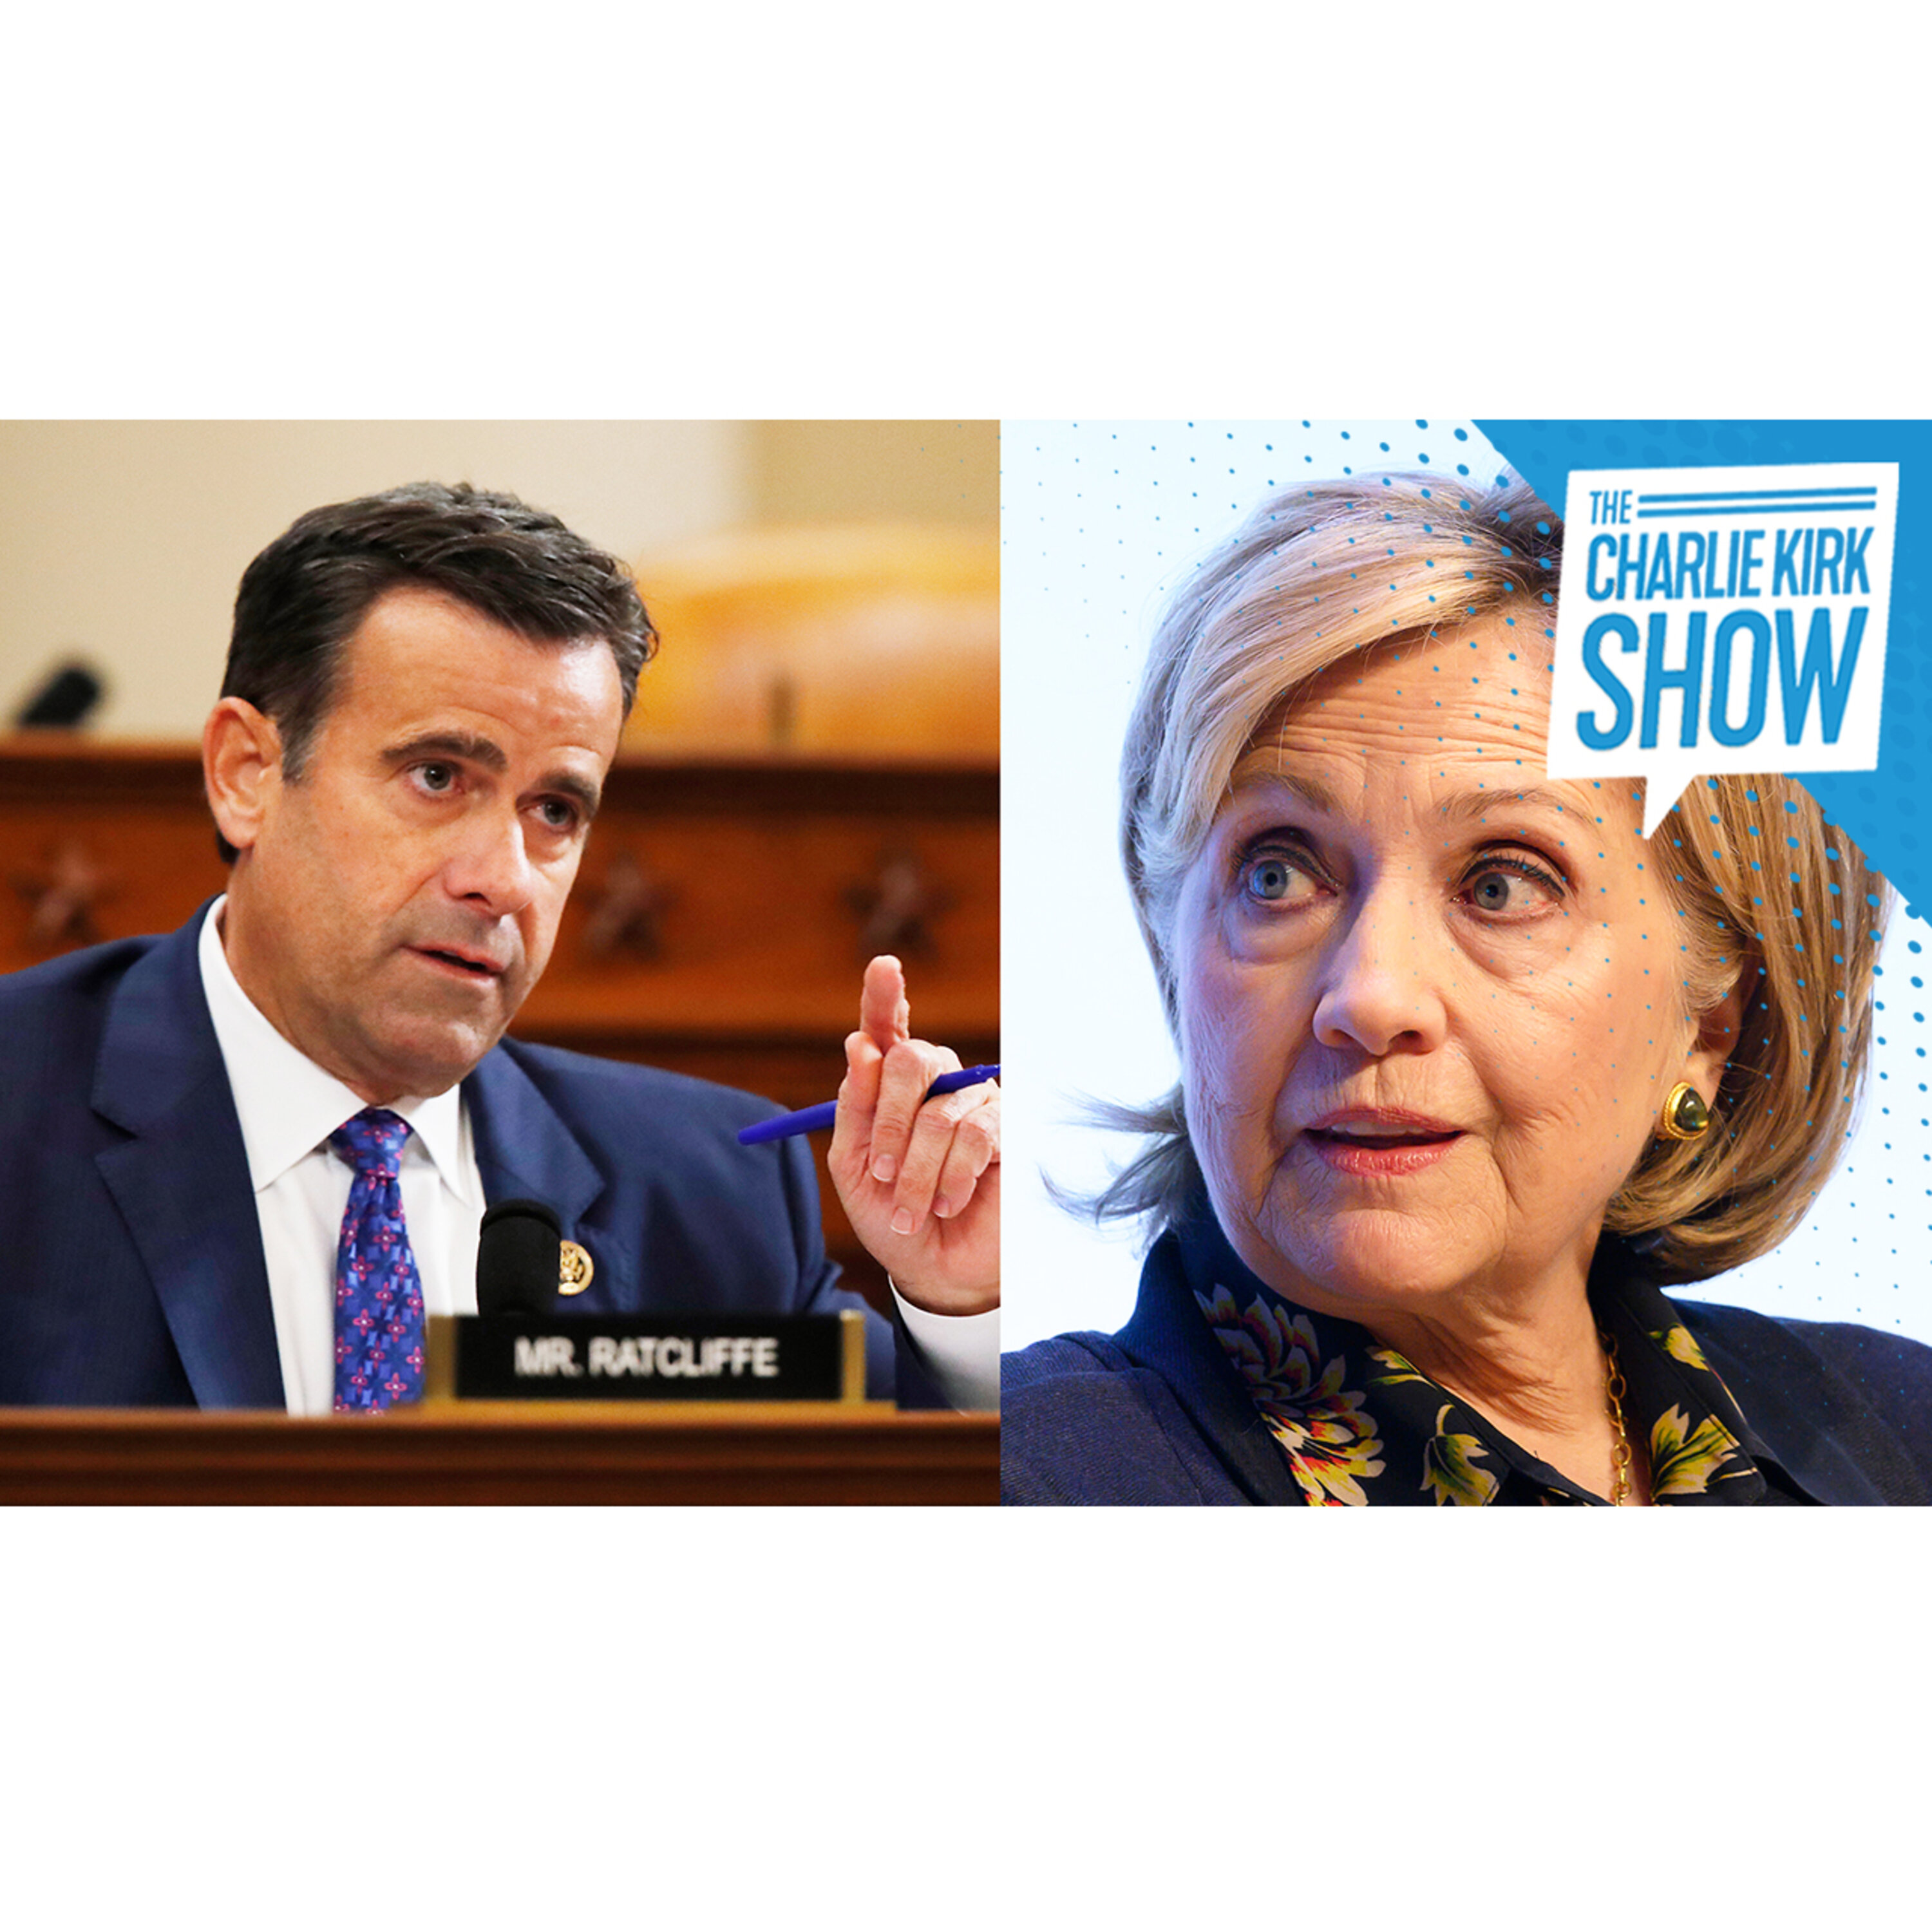 Durham Zeroes In on Hillary — An Update with Fmr. Director of National Intelligence John Ratcliffe